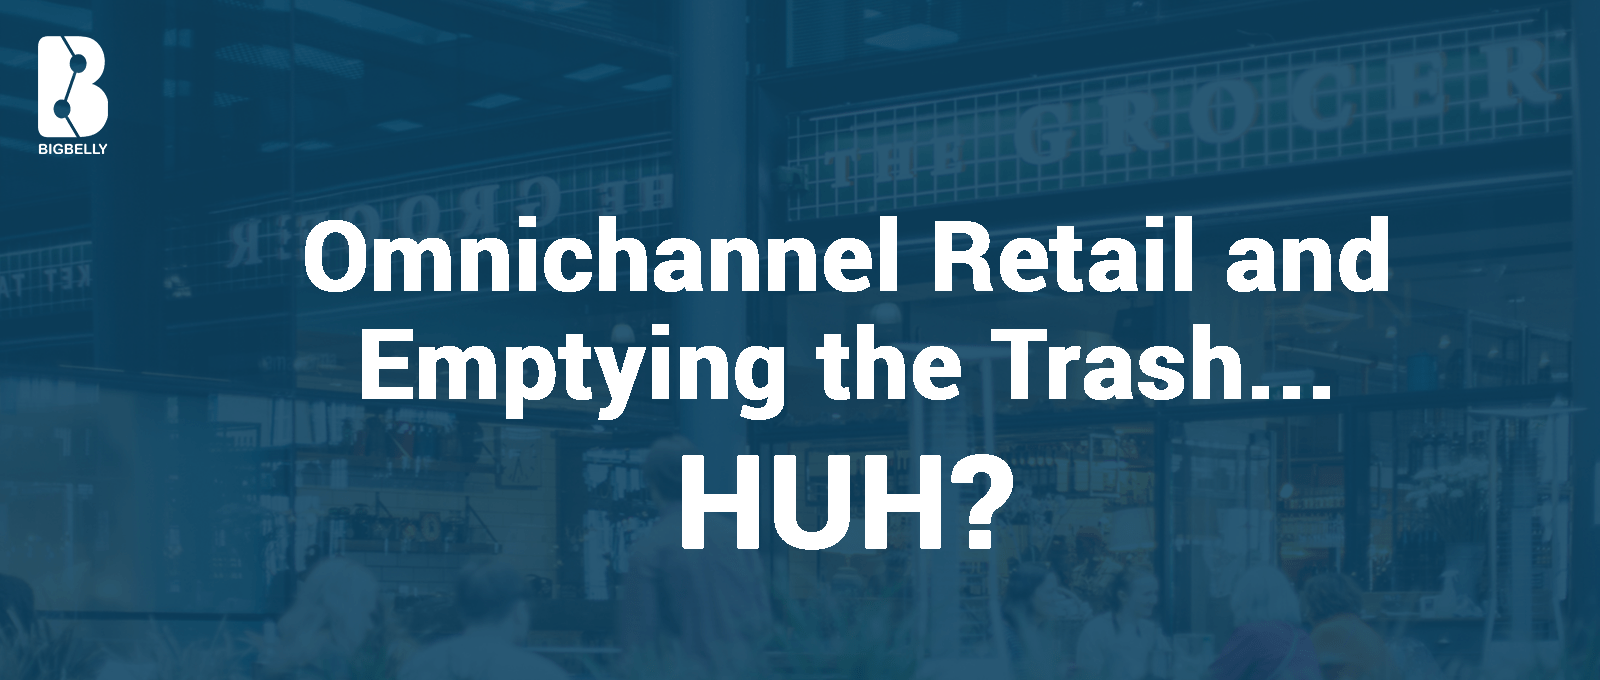 OMNICHANNEL RETAIL AND EMPTYING THE TRASH – HUH.png